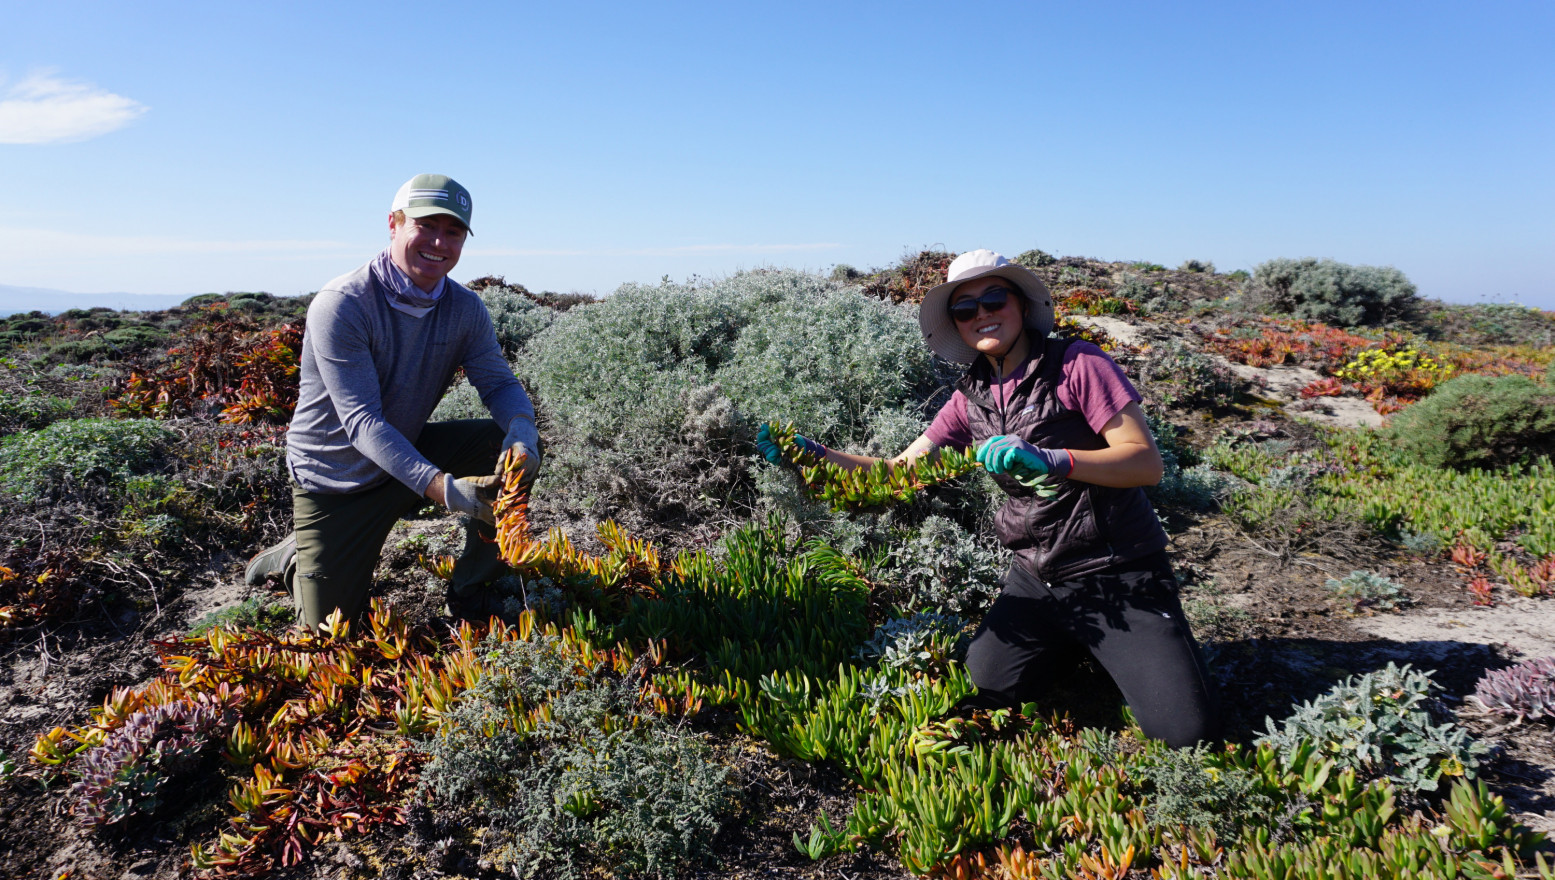 Two people smiling pulling iceplant from a dune (colors range from light green to red pink orange on that plant) with dusty blue coastal sage and a blue sky behind them